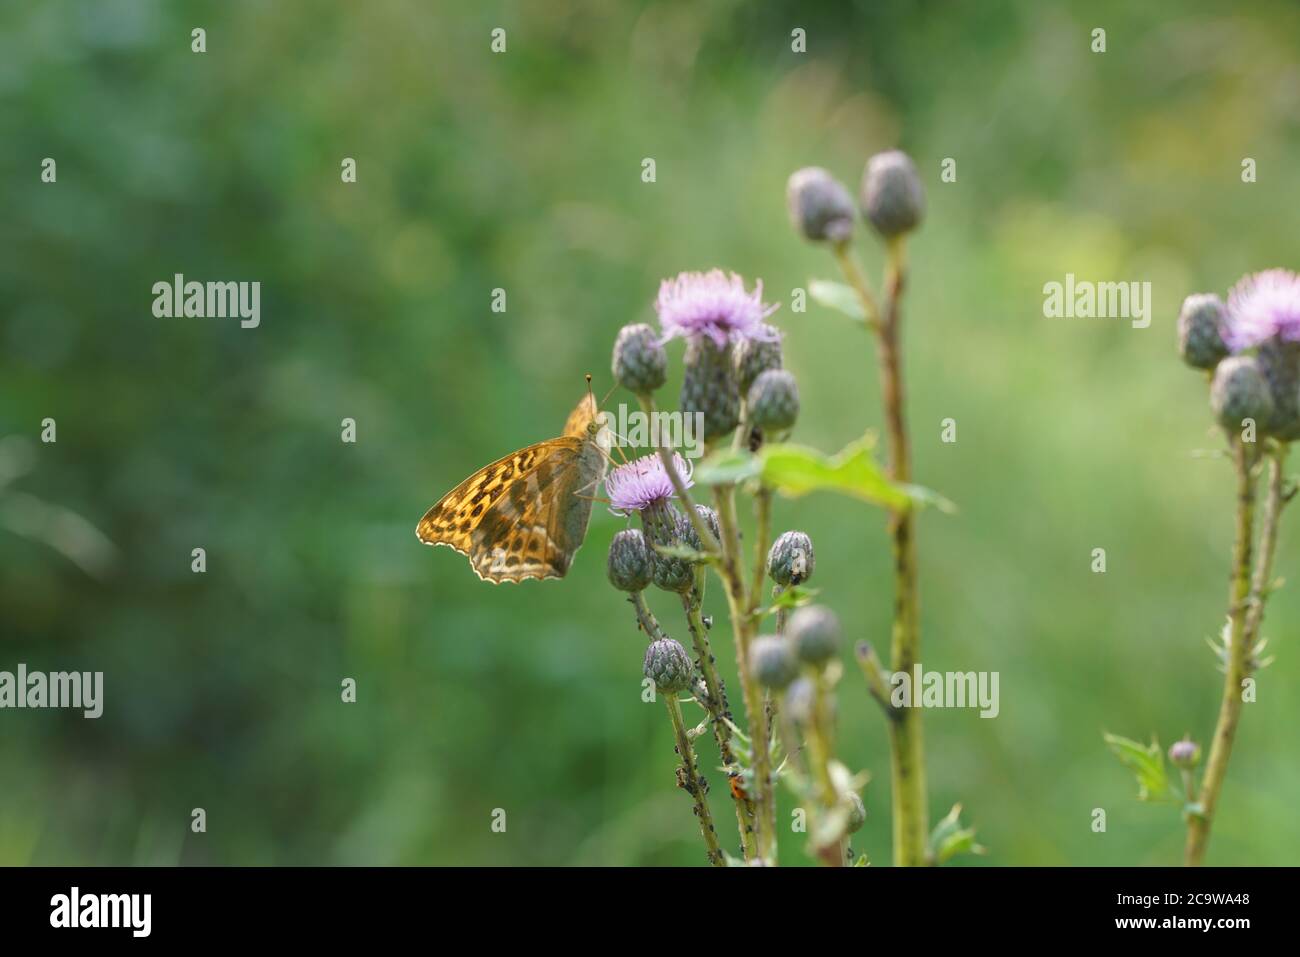 Silver-washed fritillary butterfly in detail Stock Photo